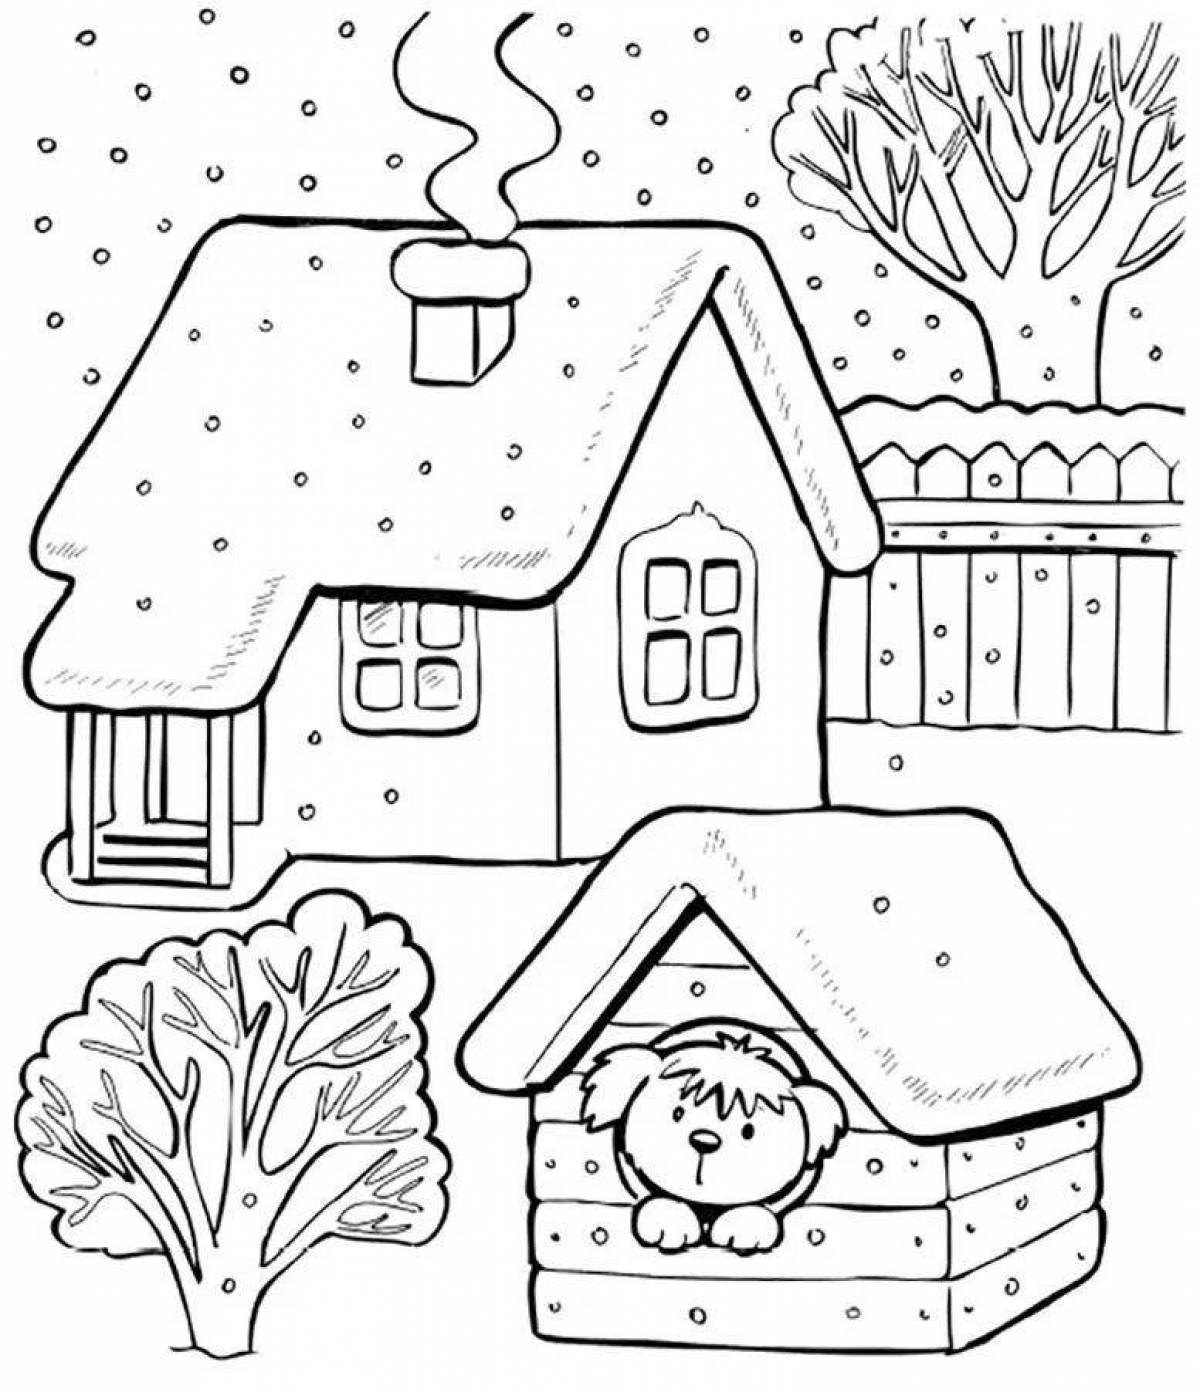 Vivid winter forest coloring pages for 4-5 year olds